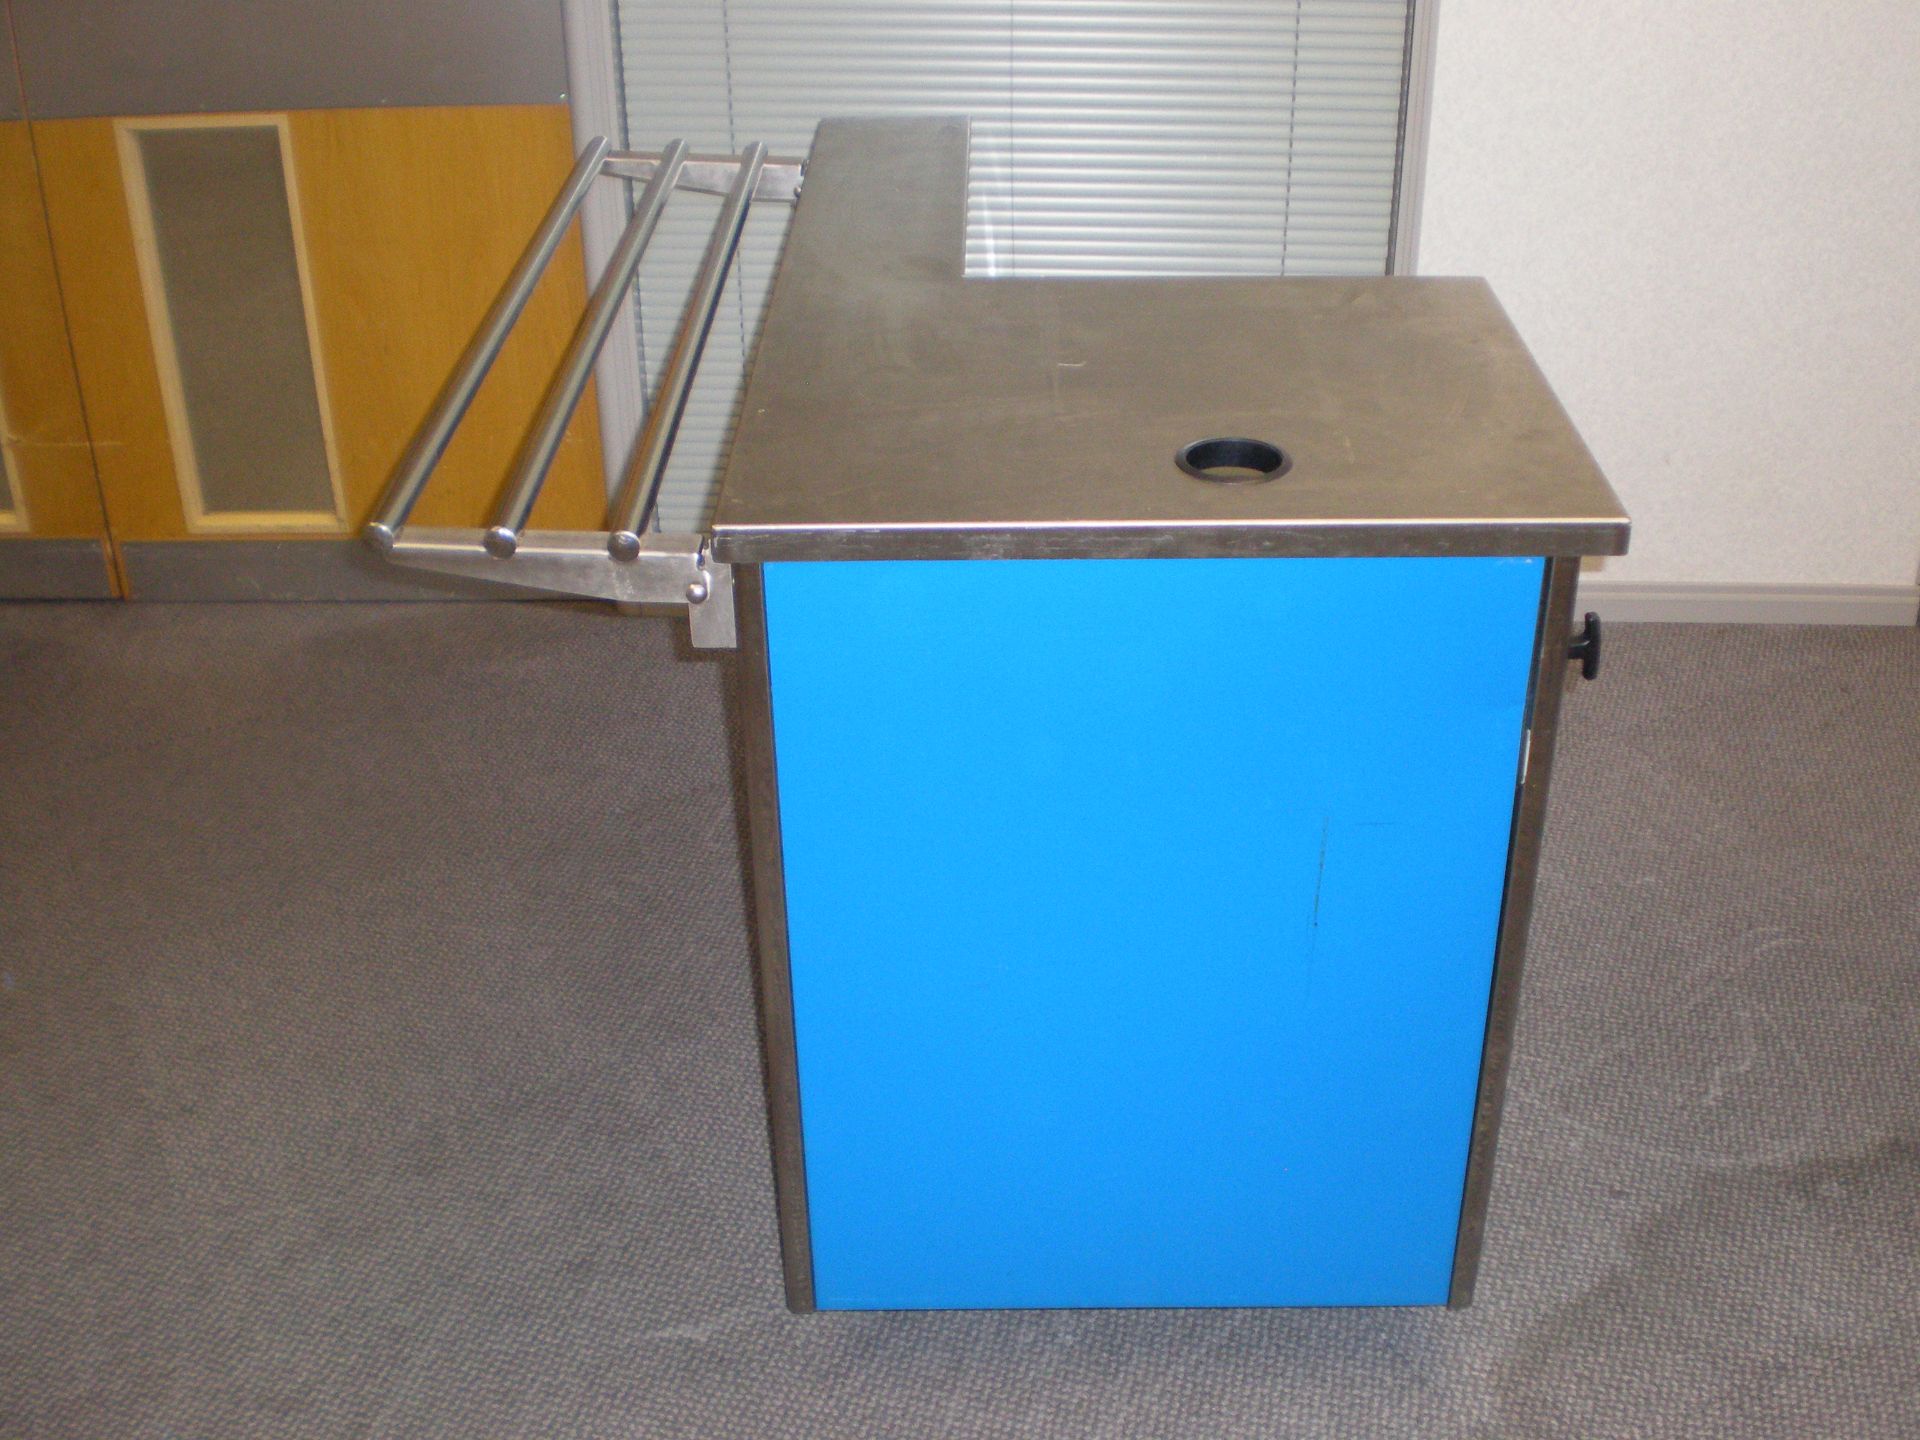 Canteen Stainless Steel Trolly Pay Station For Till, On Wheels, Collapsable Shelf For Trays, 2 - Image 2 of 6